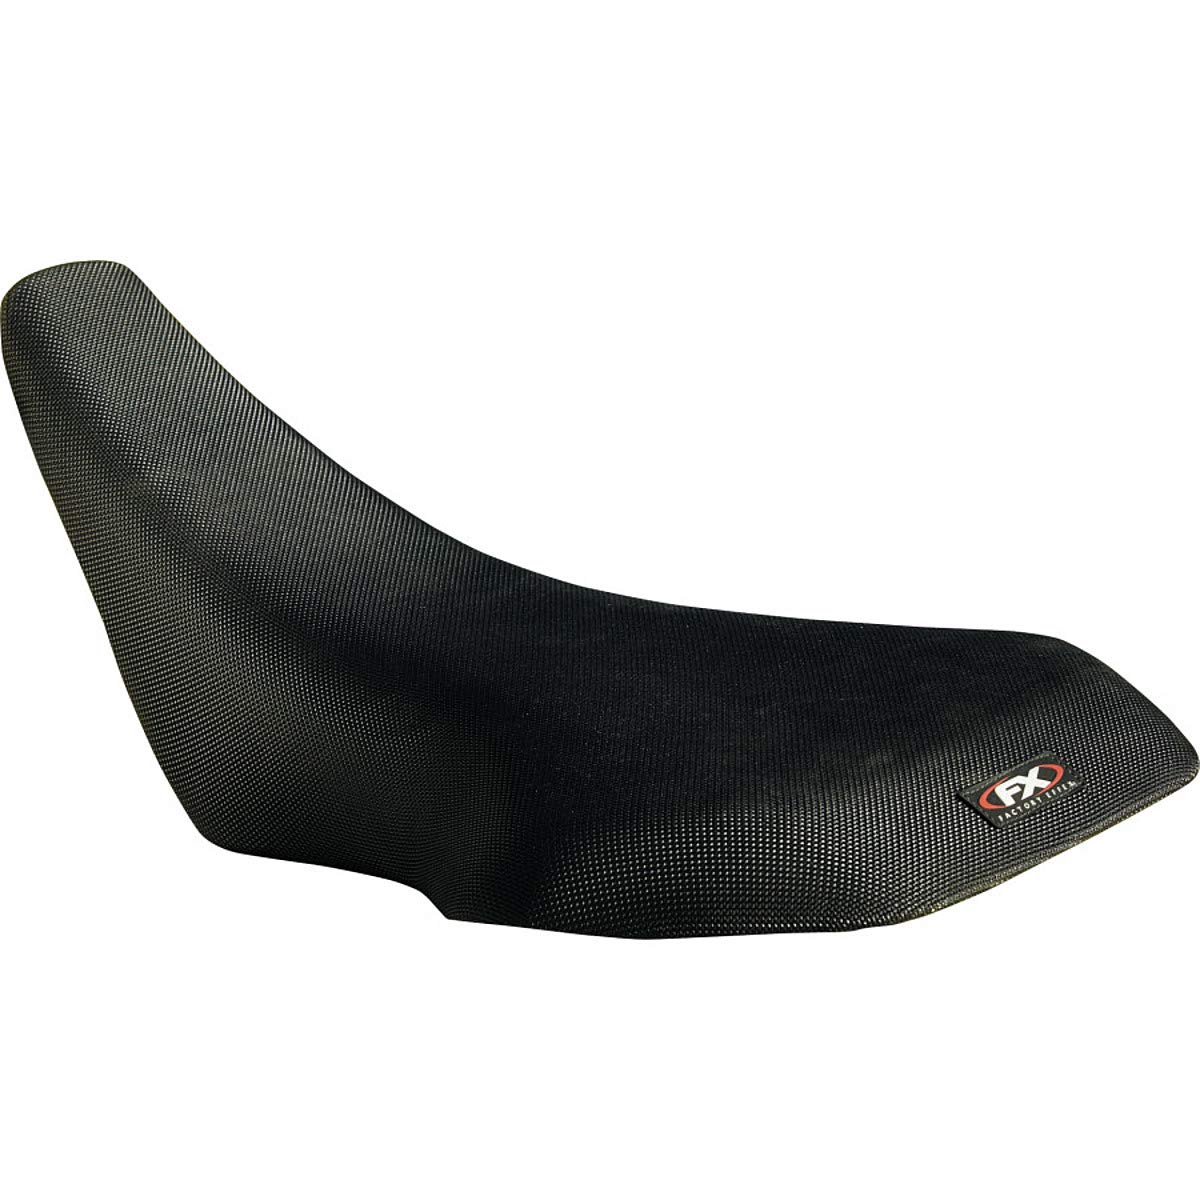 Factory Effex (10-24260 Black All-Grip Seat Cover von Factory Effex